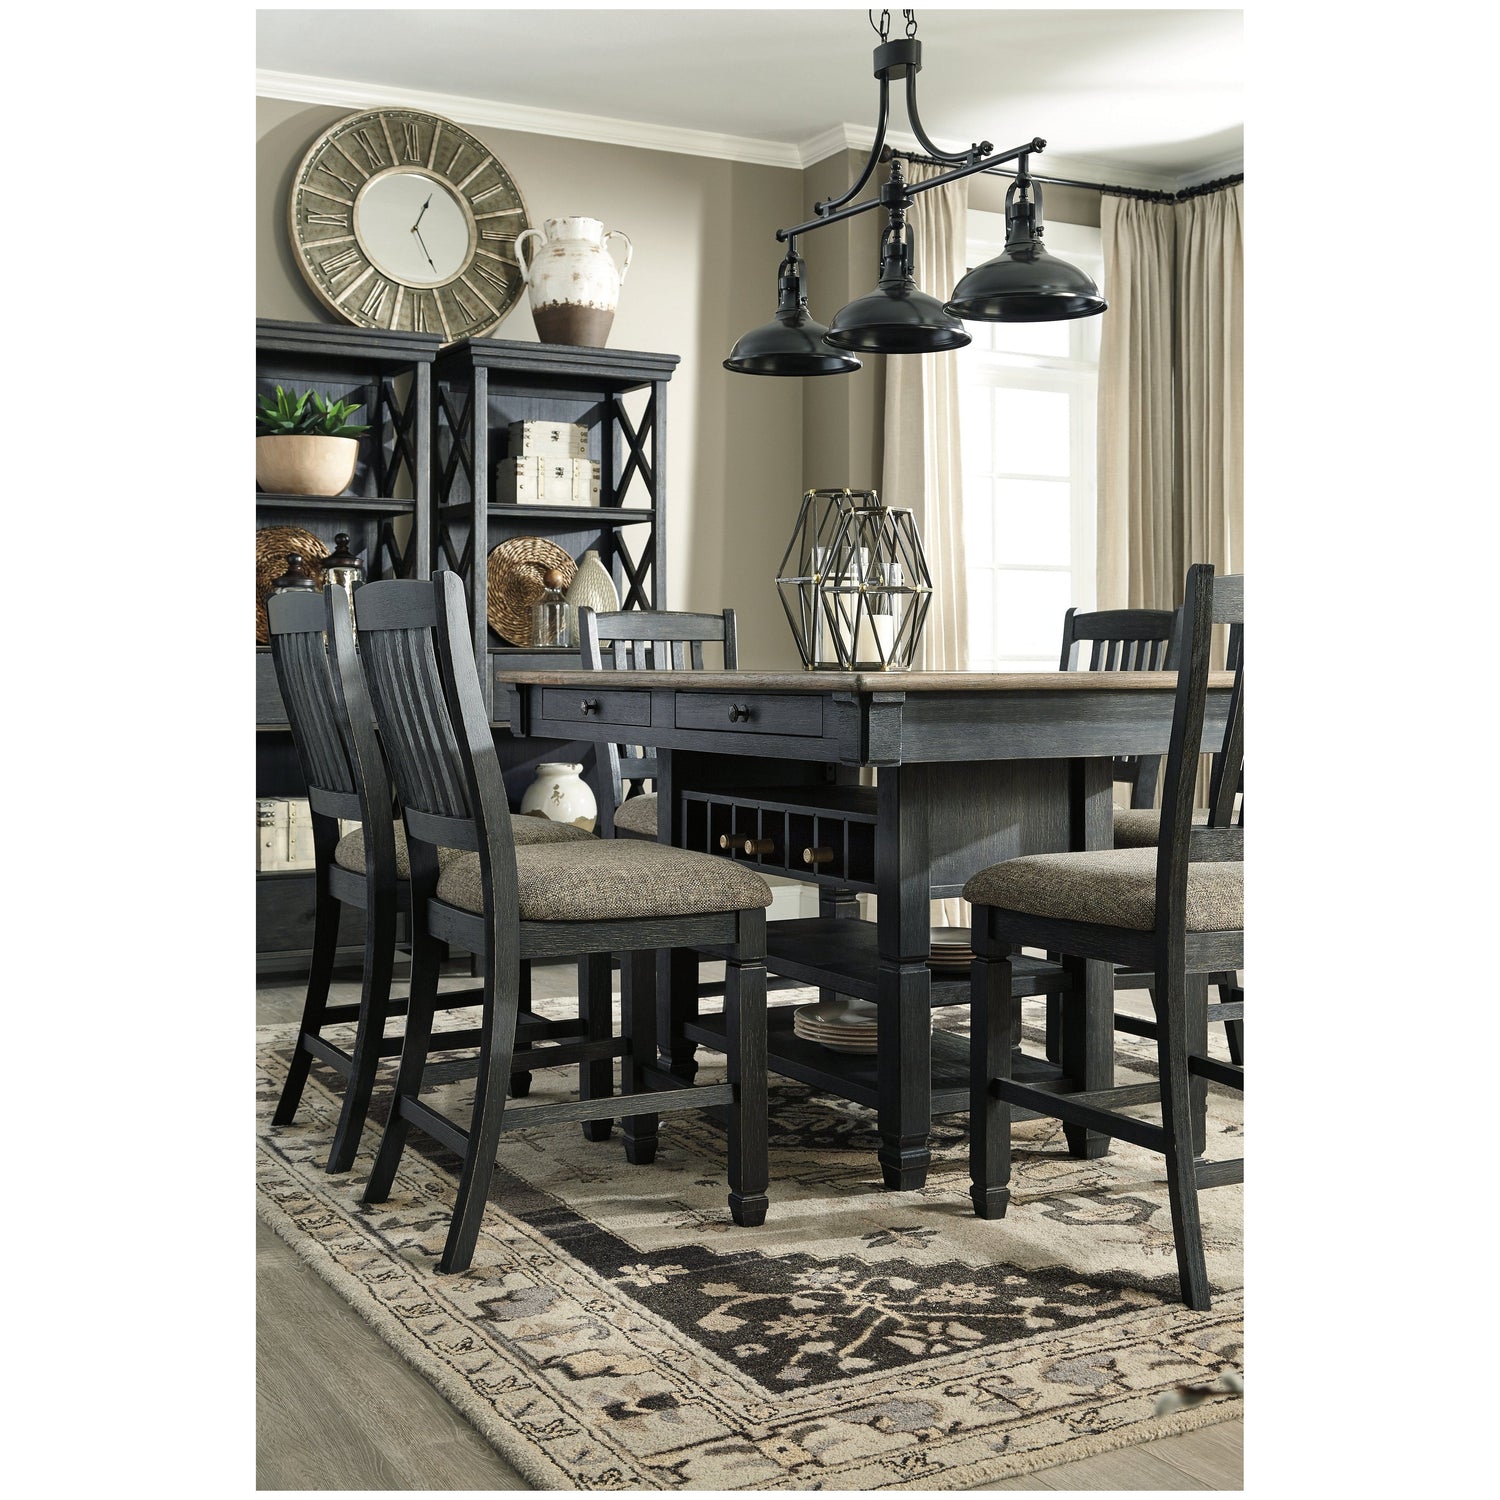 Tyler Creek Counter Height Dining Table Ash-D736-32